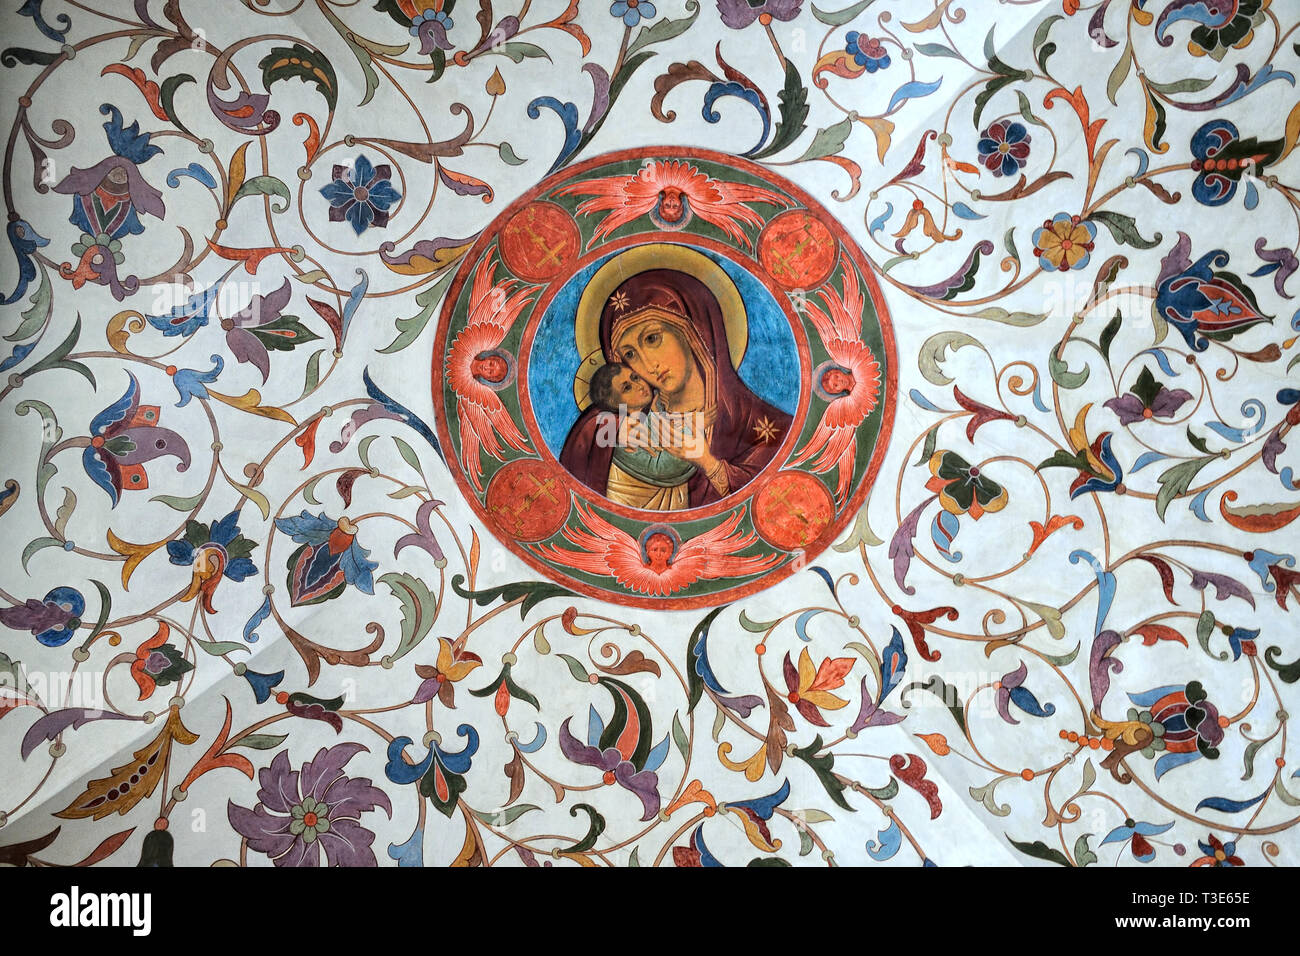 = Medallion Our Lady with Son and Floral Ornaments =  Interior ceiling in the ground level of St. Basil’s Cathedral with restored 17th century murals, Stock Photo